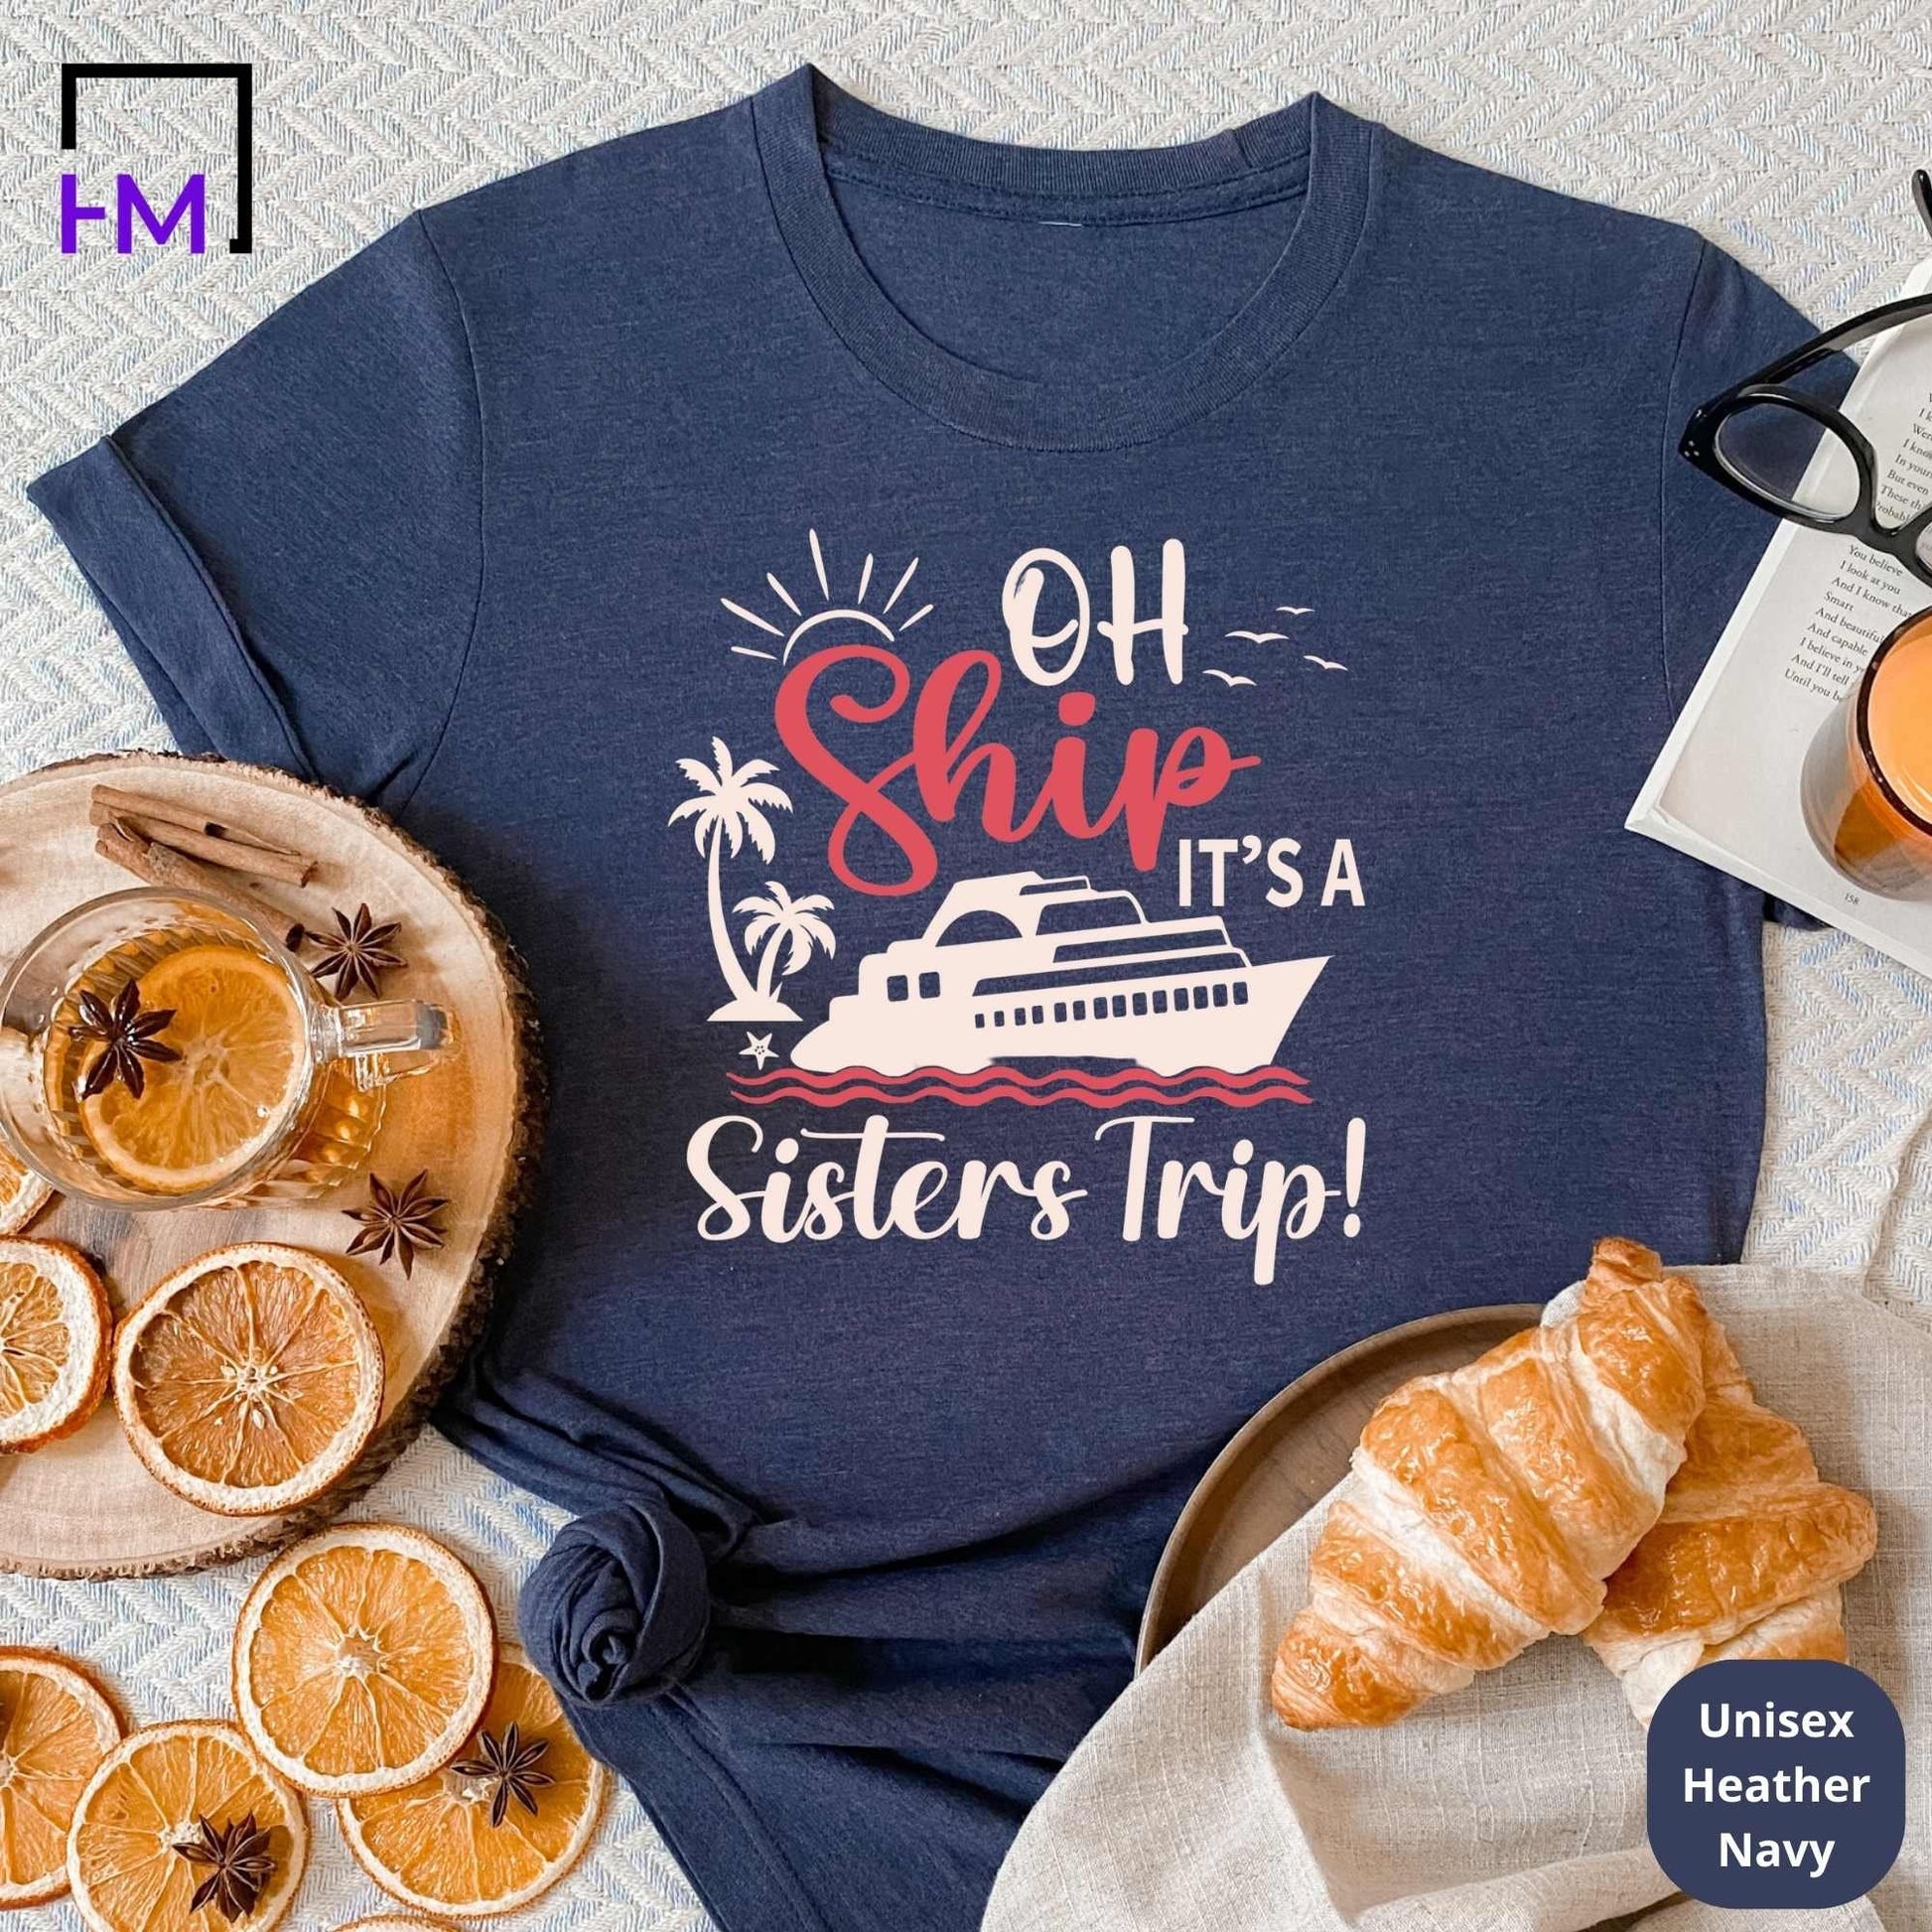 Sisters Cruise Shirts for Girls Trip